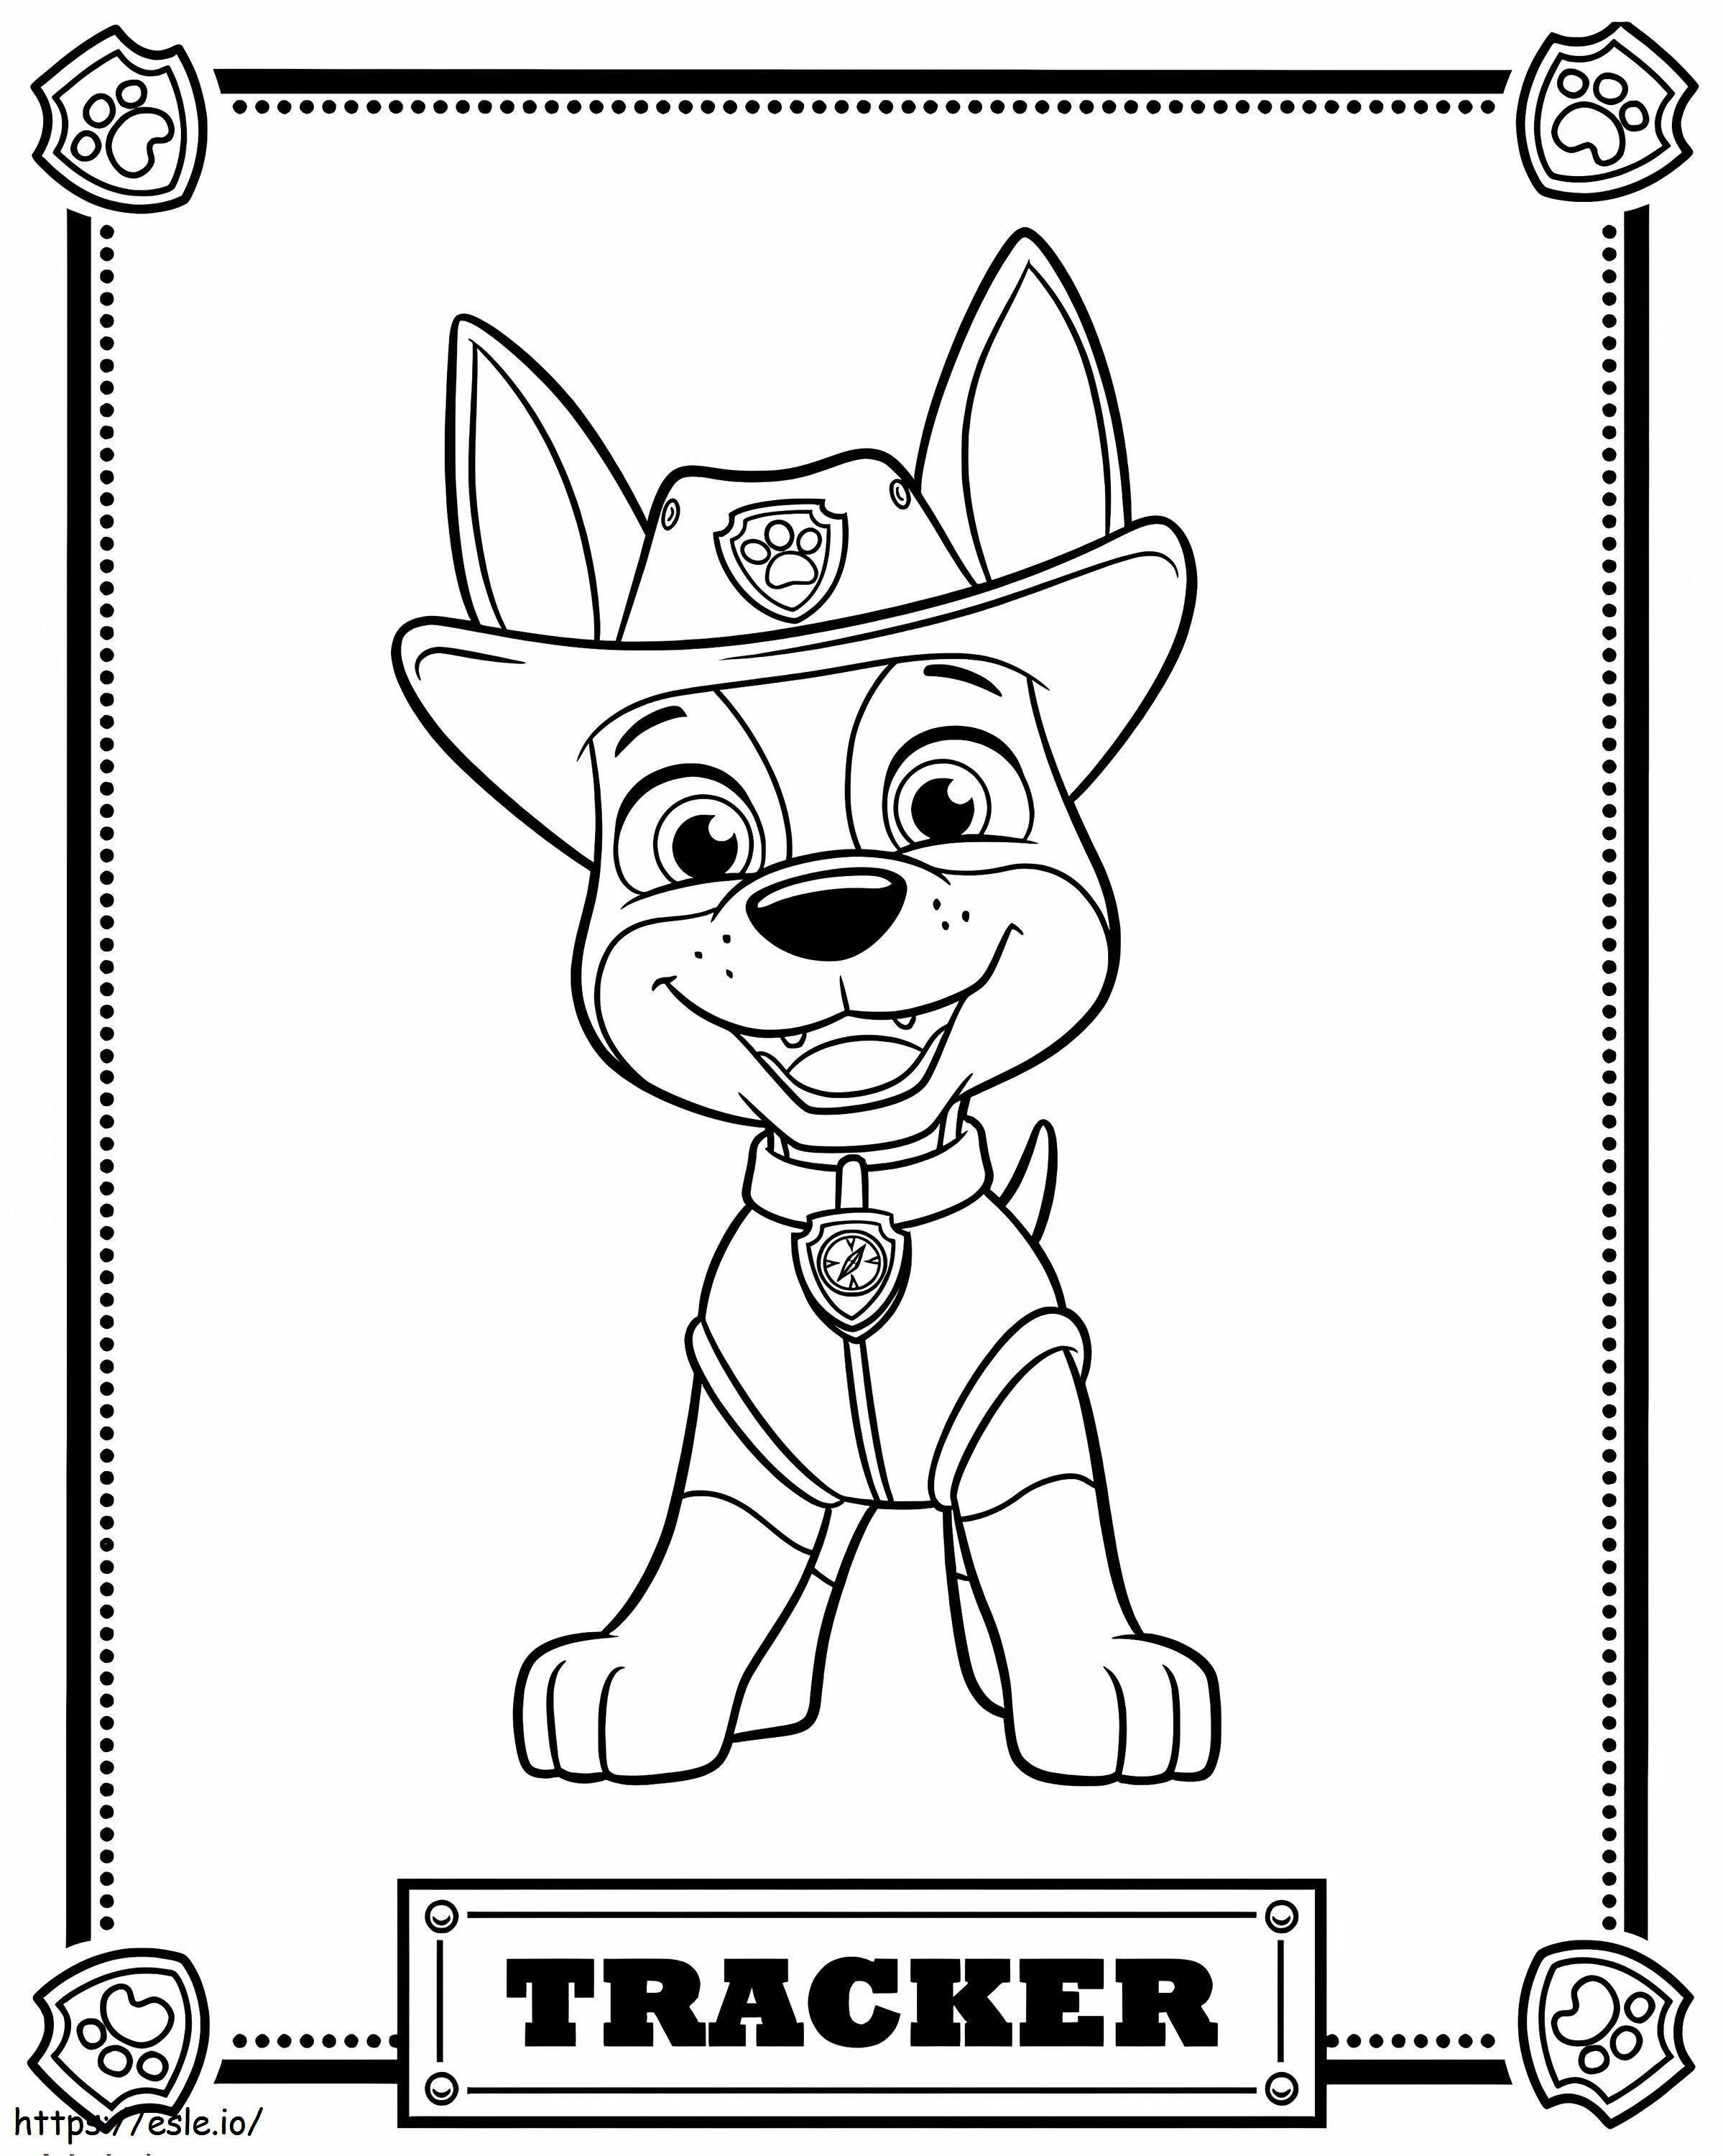 Tracker In Paw Patrol coloring page